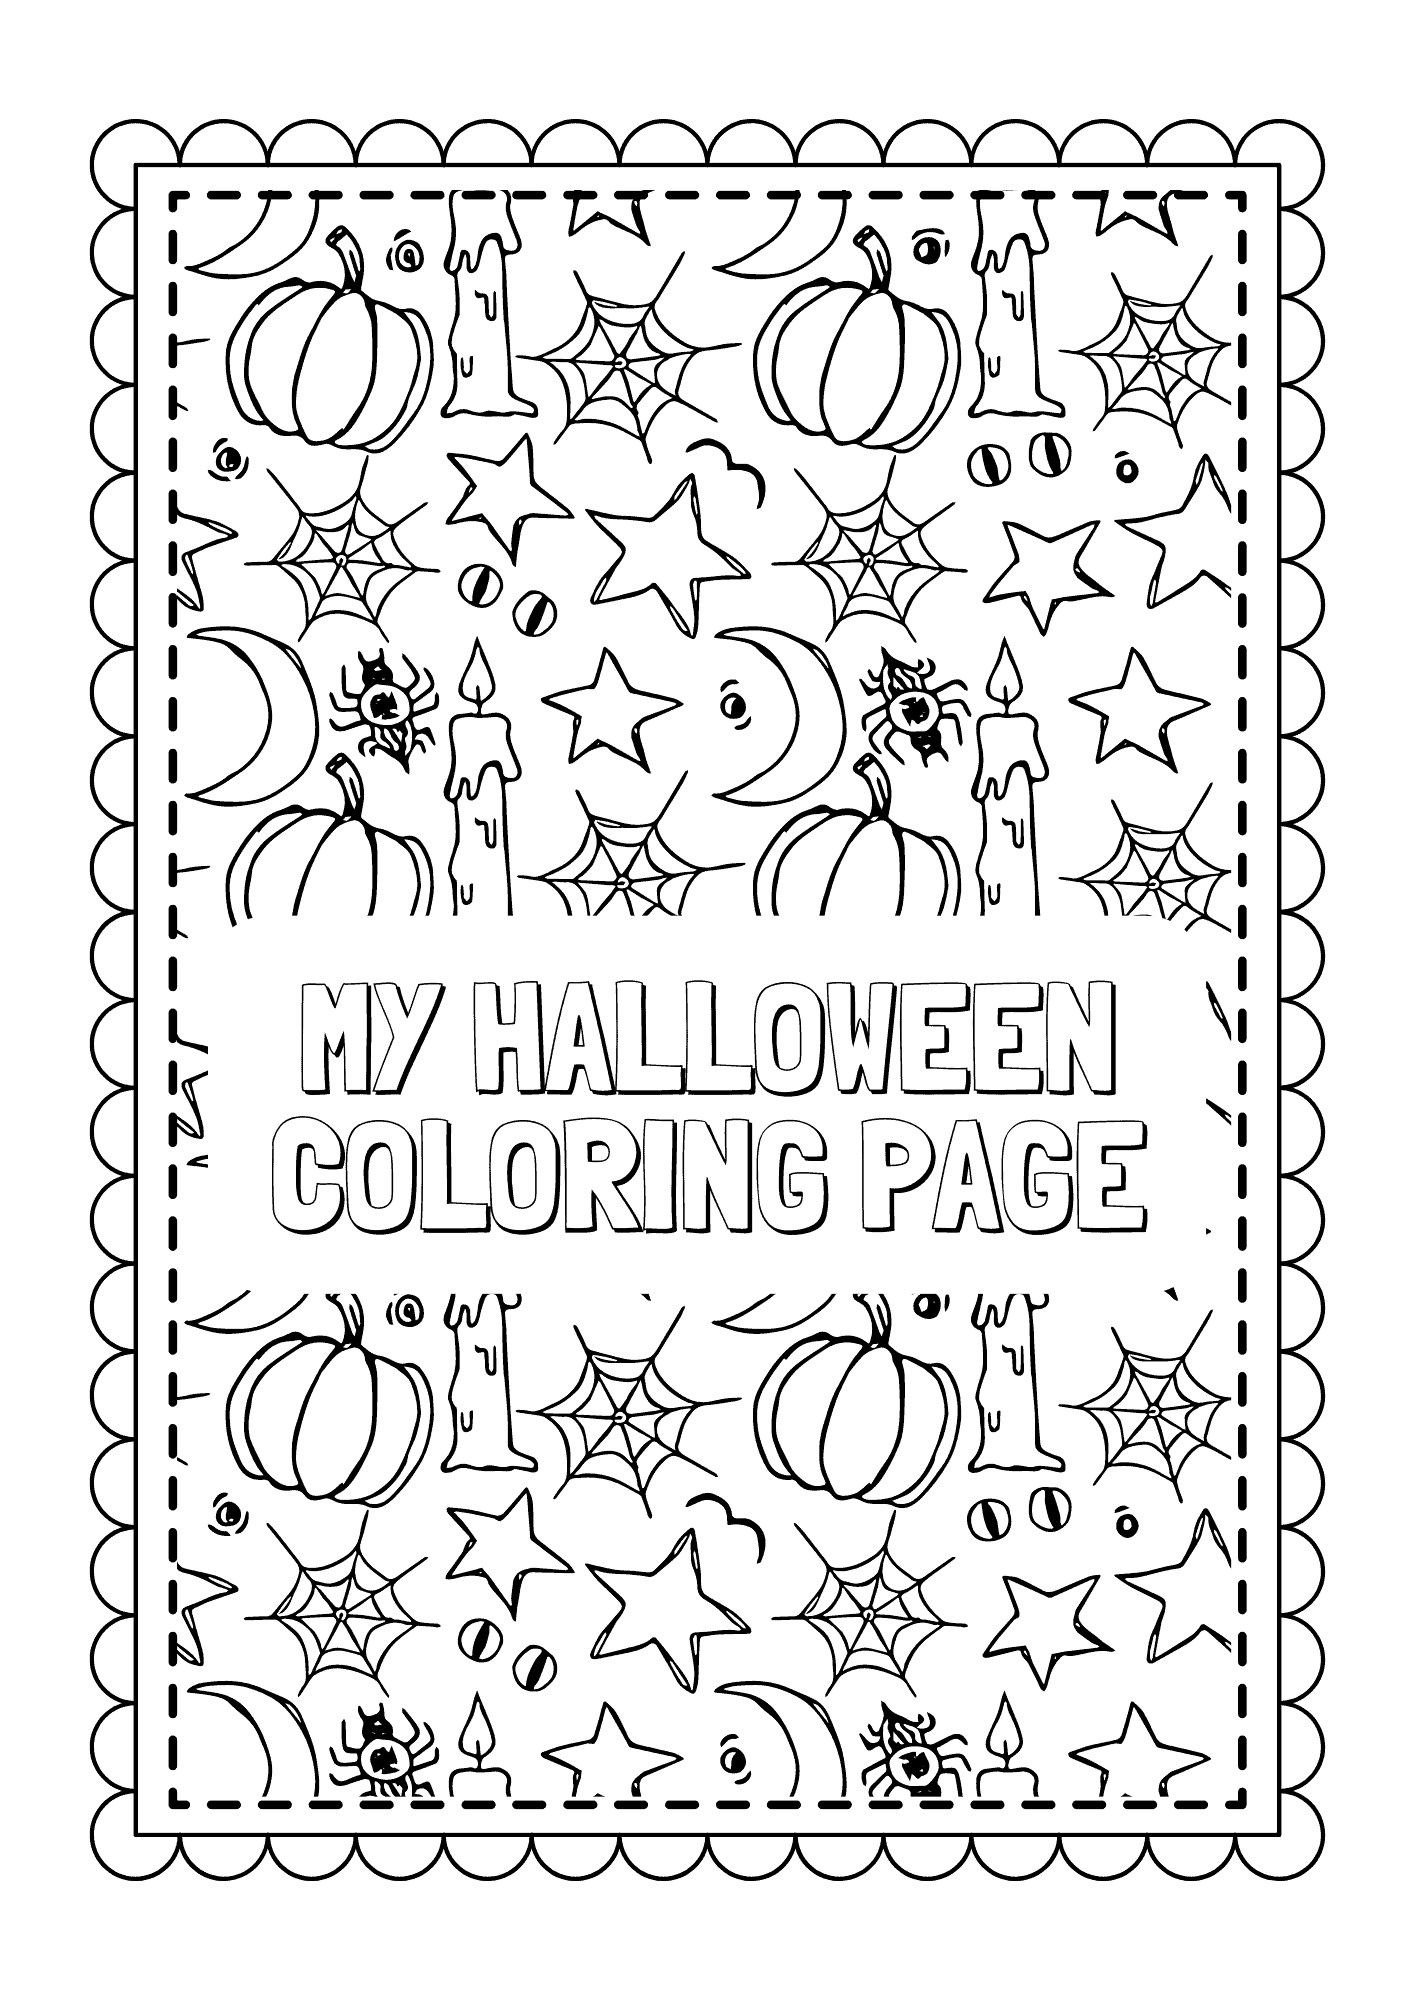 Greyscale Halloween Doodle Coloring Page Worksheet